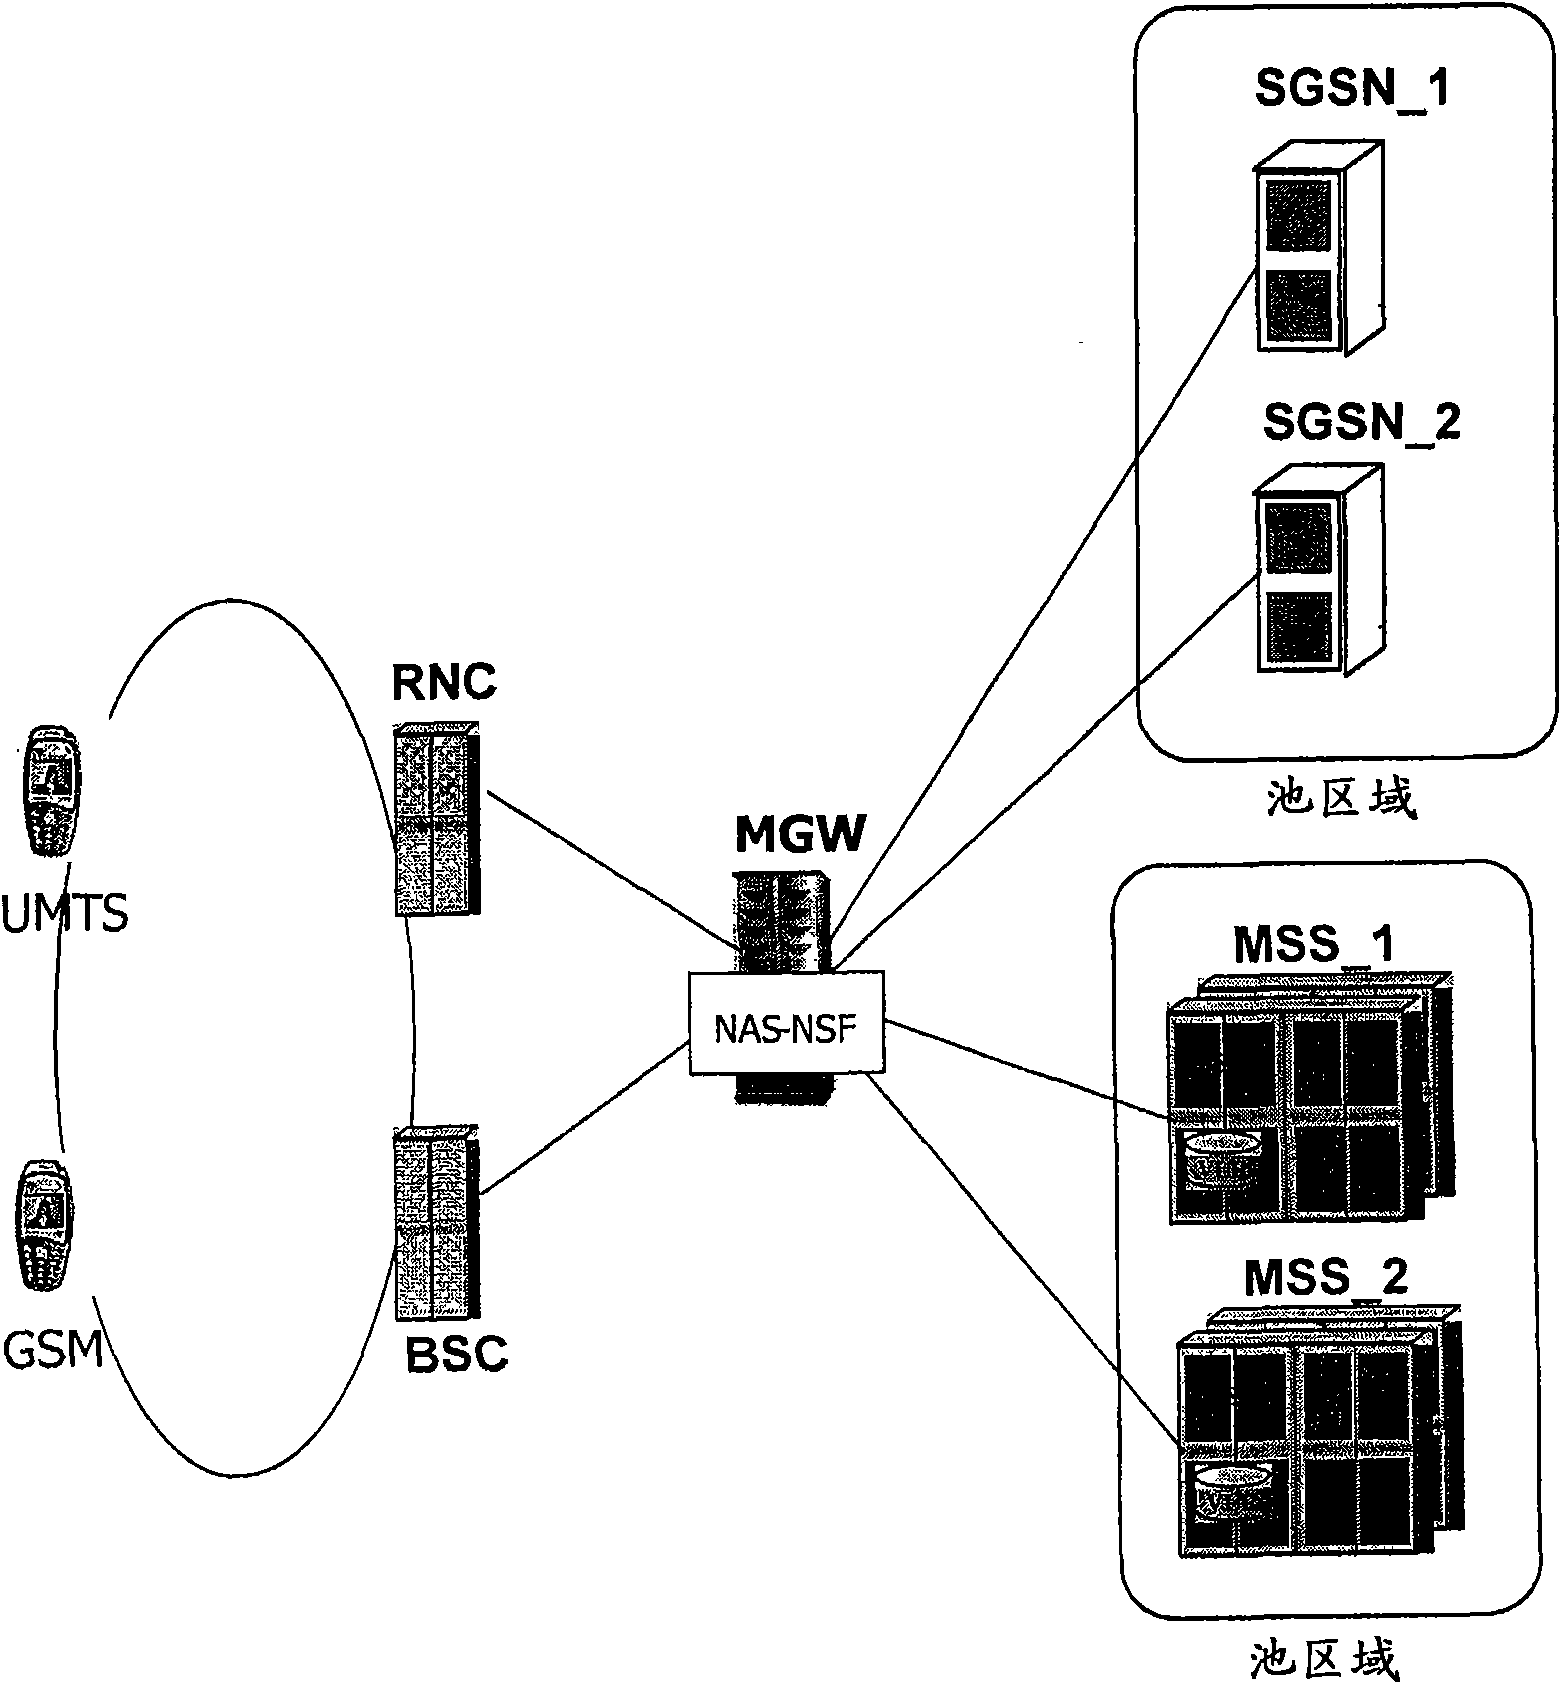 Node selection function for multipoint radio network configurations